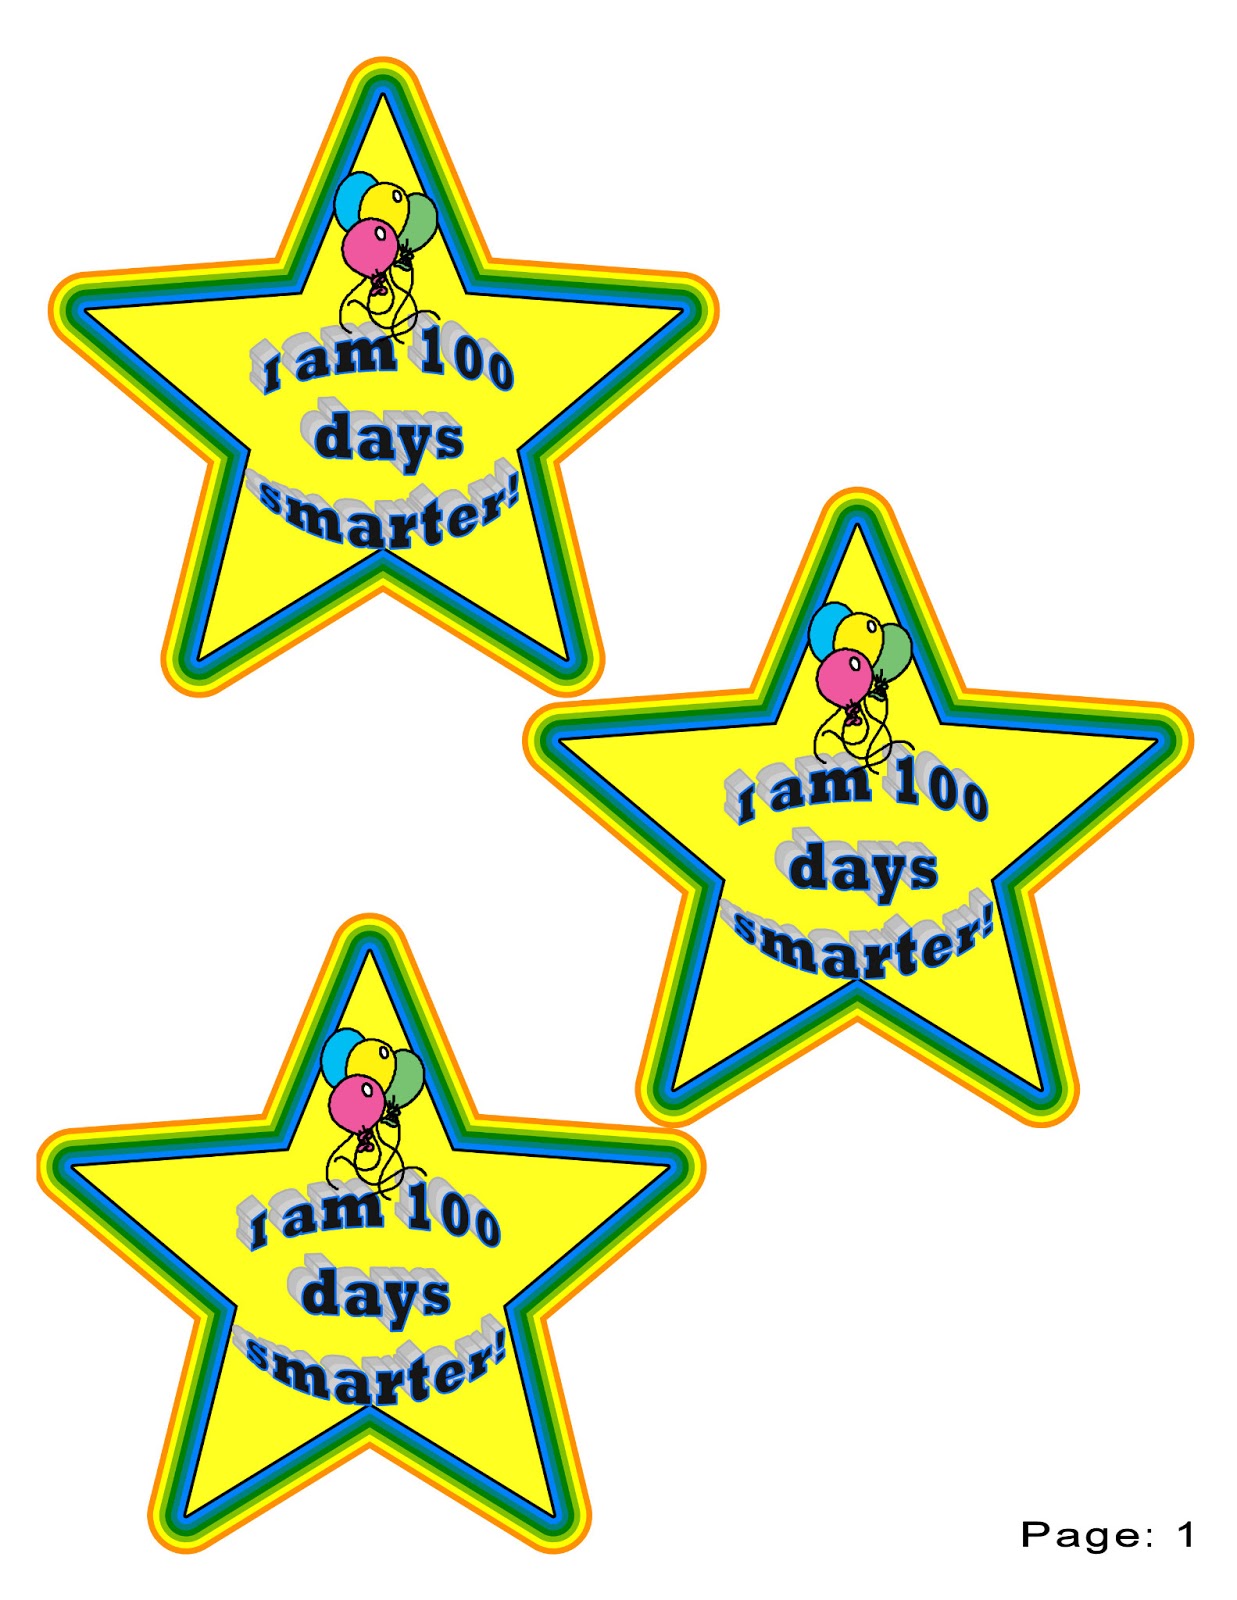 christina-s-kinder-blossoms-100th-day-of-school-freebies